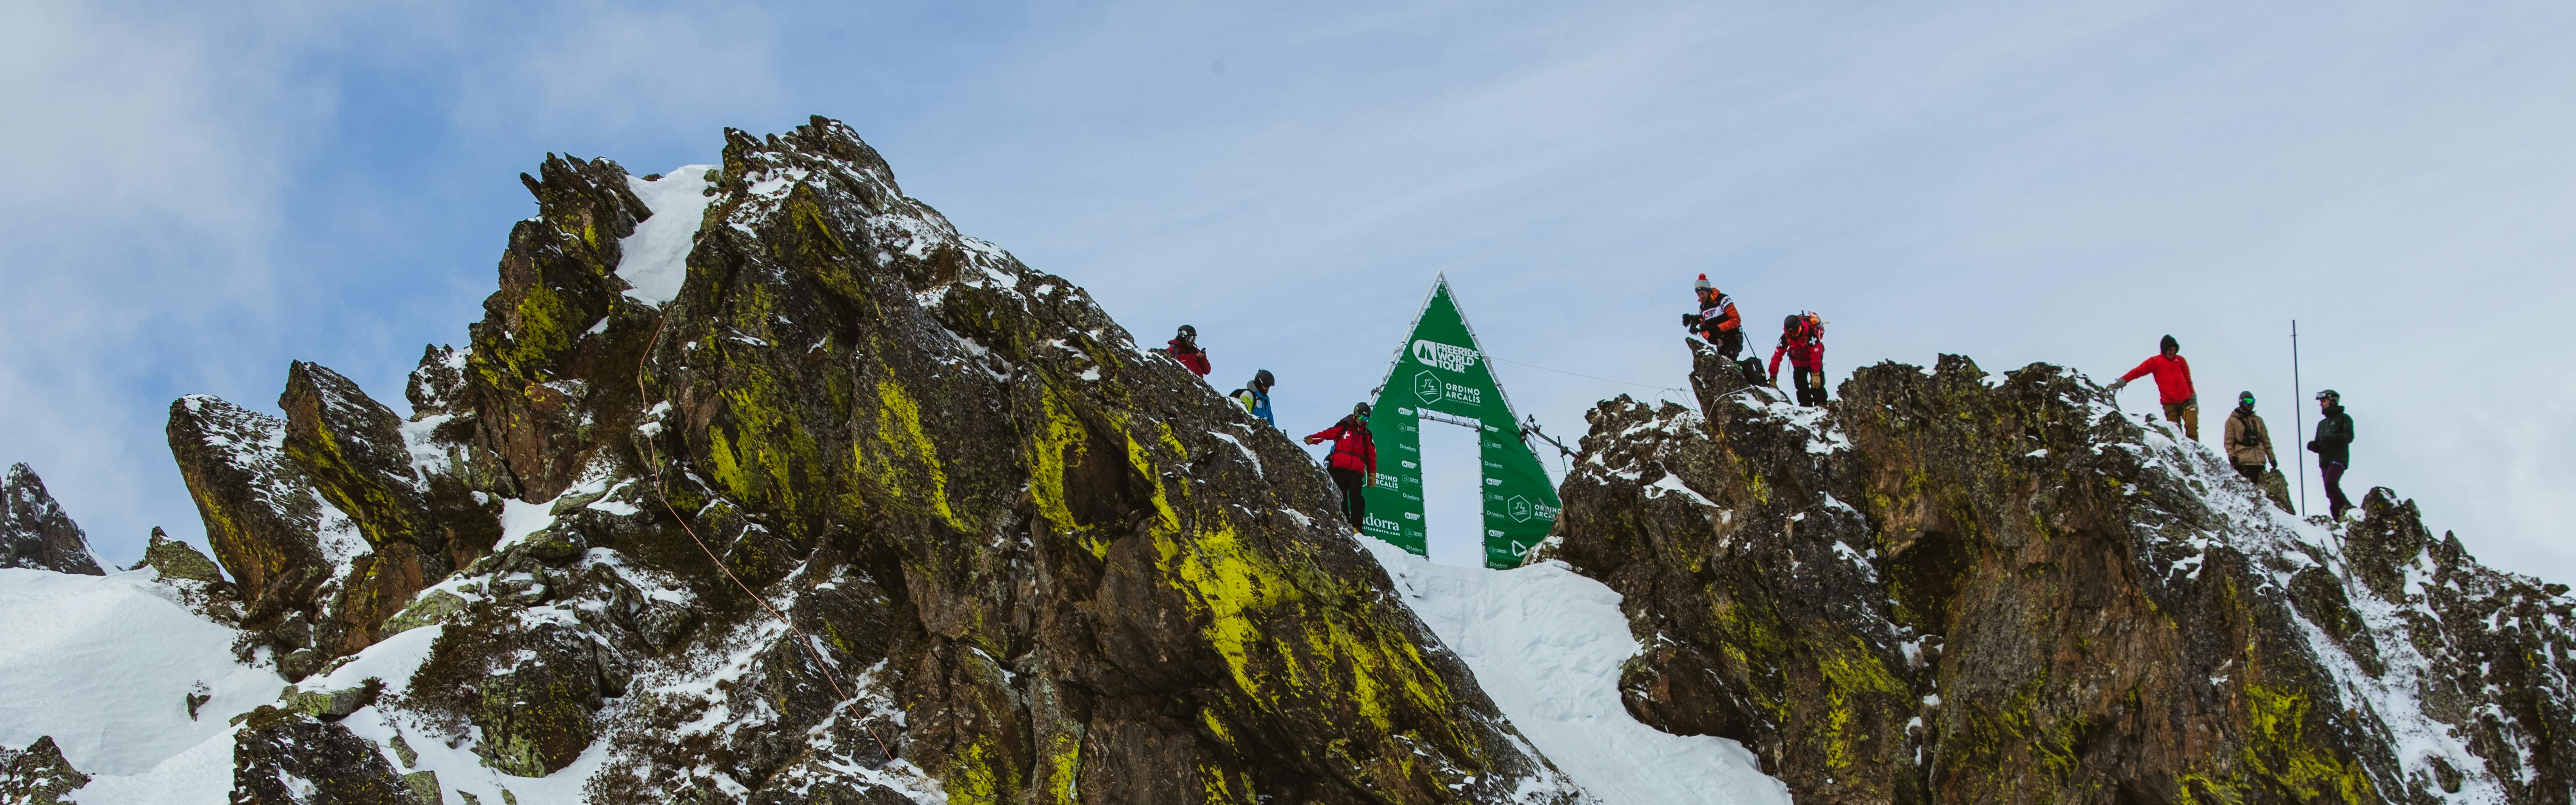 An FWT stand sits on the top of a rocky ridge with skiers clustered around it.